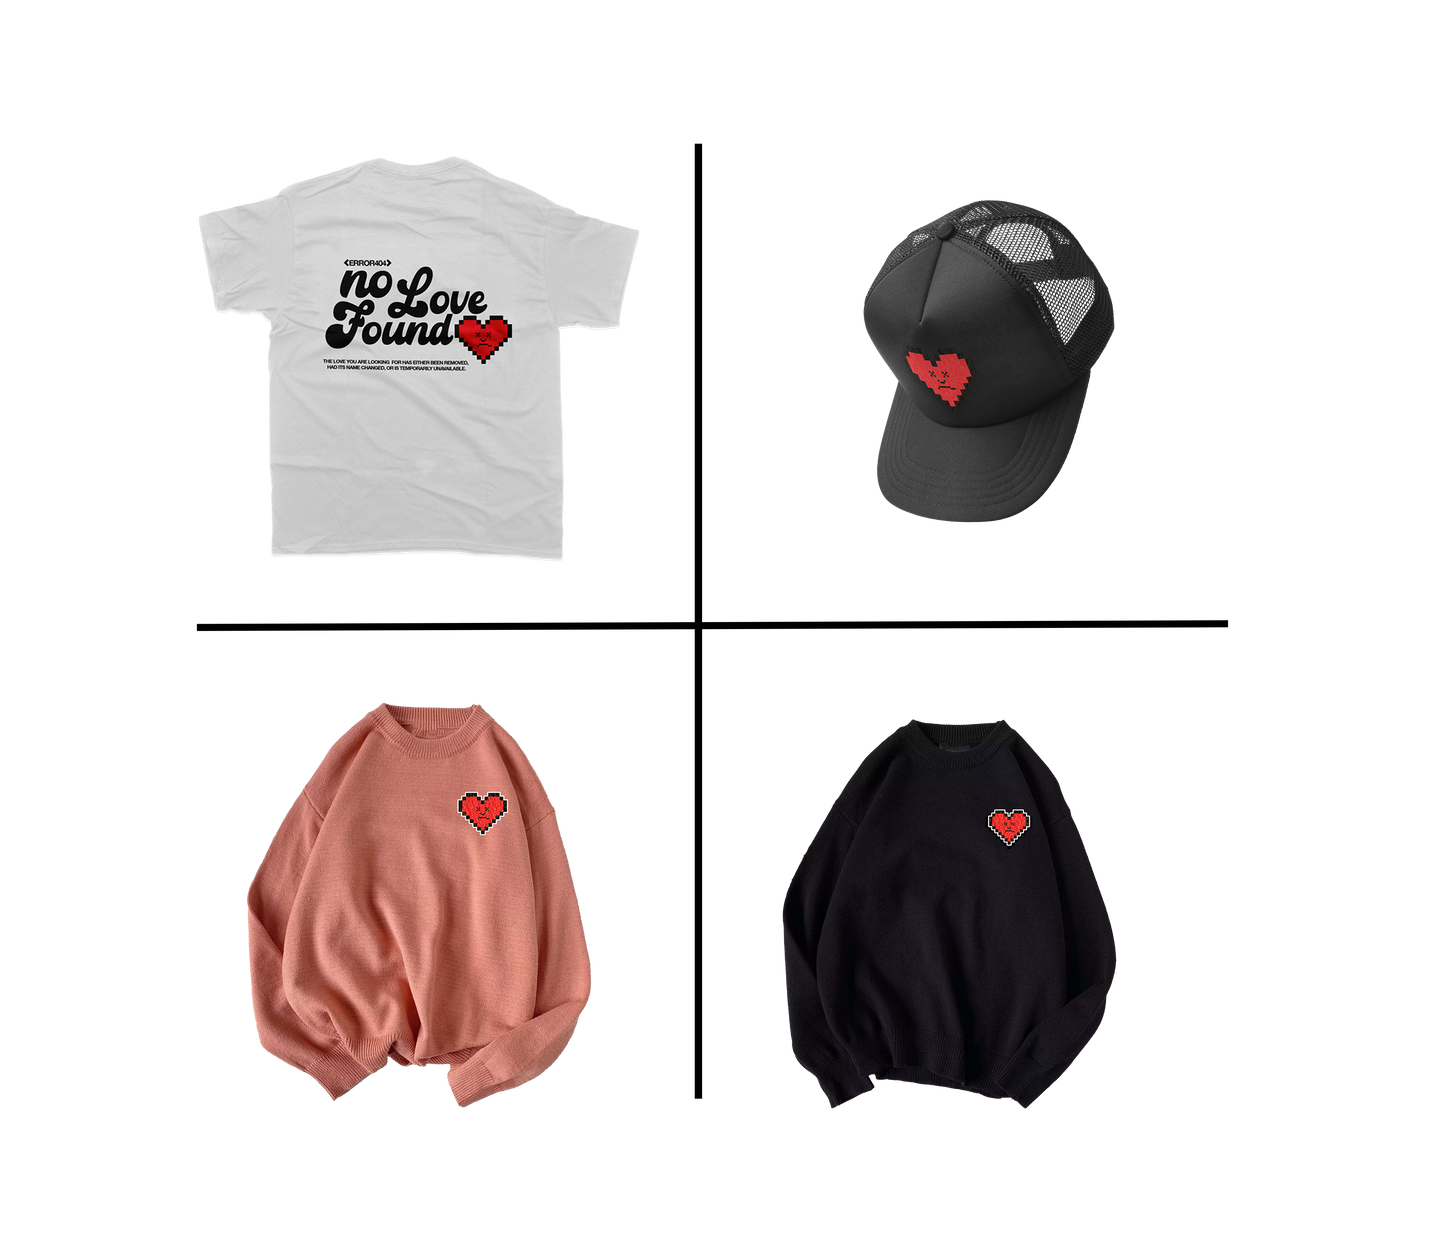 _.nolovefound-black.swtr + .nolovefound-pink.swtr + .nolovefound.hat + .nolovefound.shrt